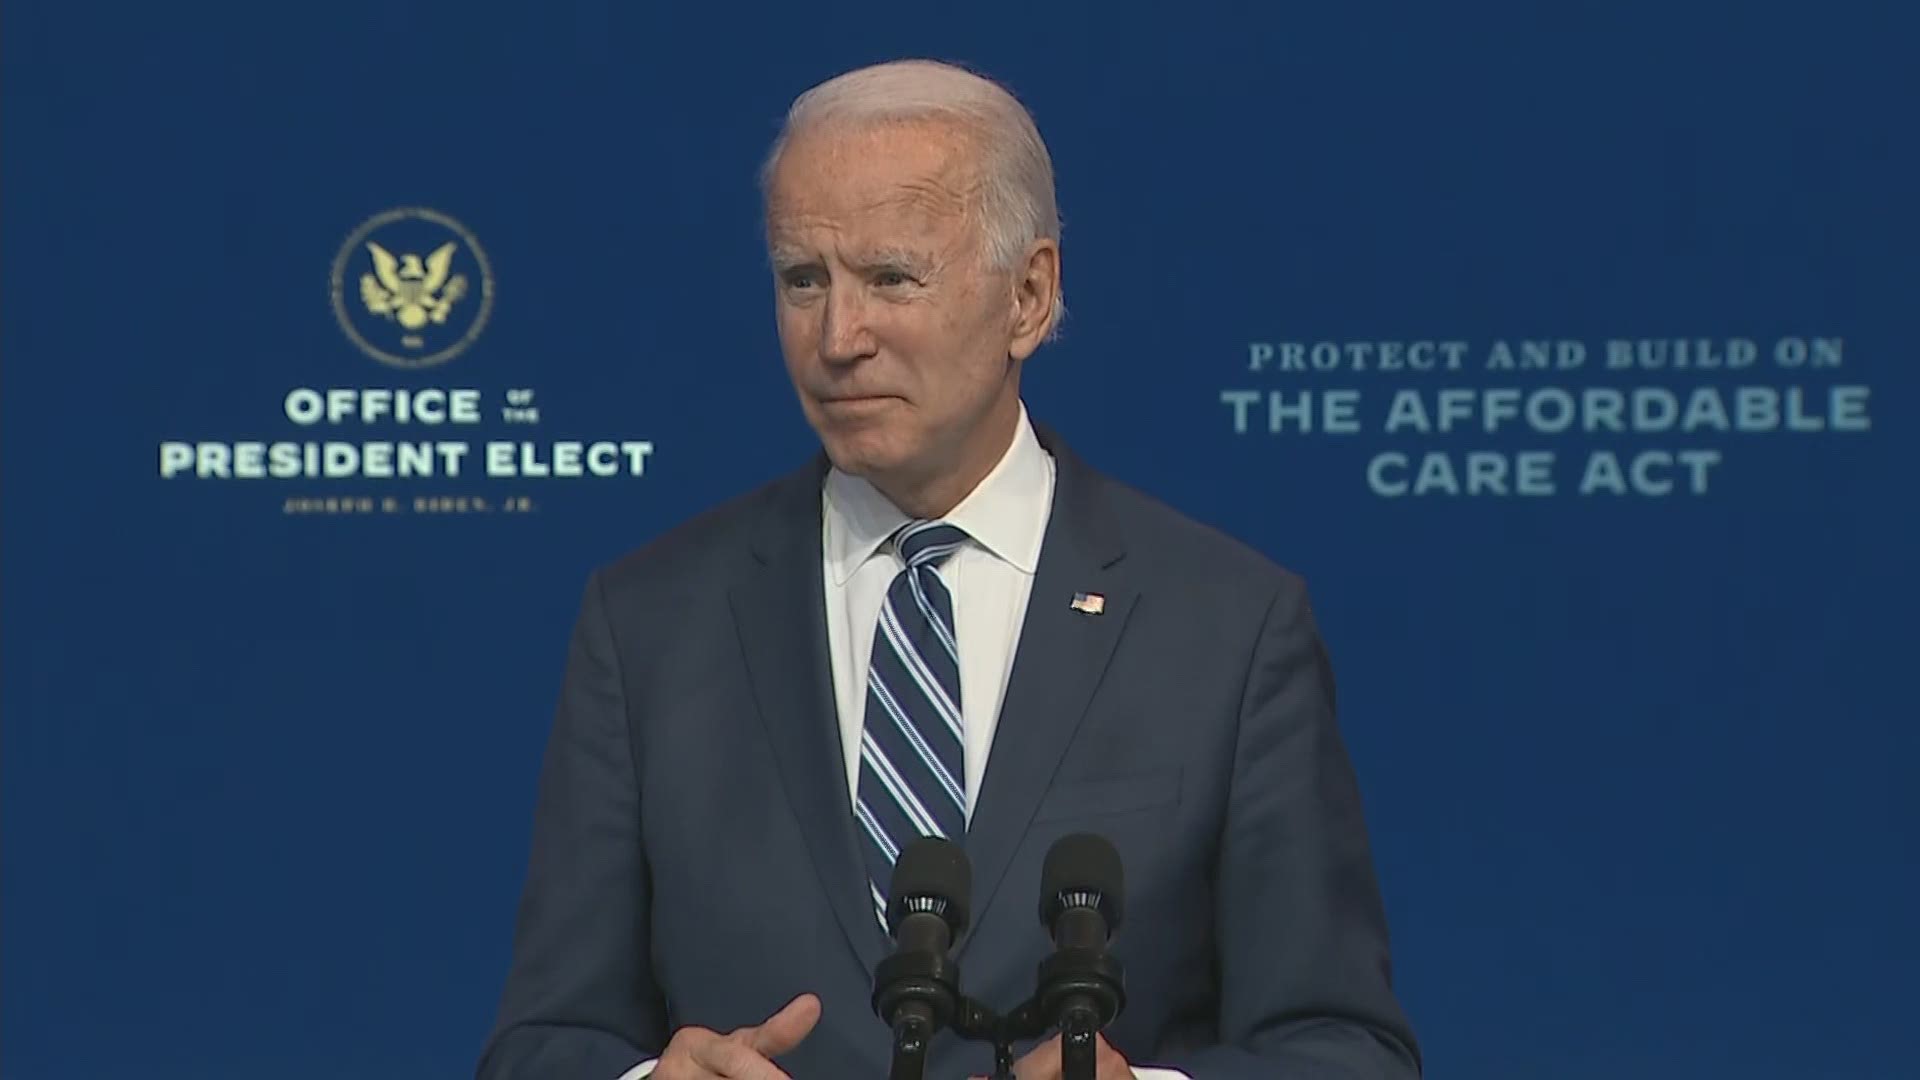 Answering questions for the first time since the election, President-elect Biden shared what his message is to world leaders and President Trump.